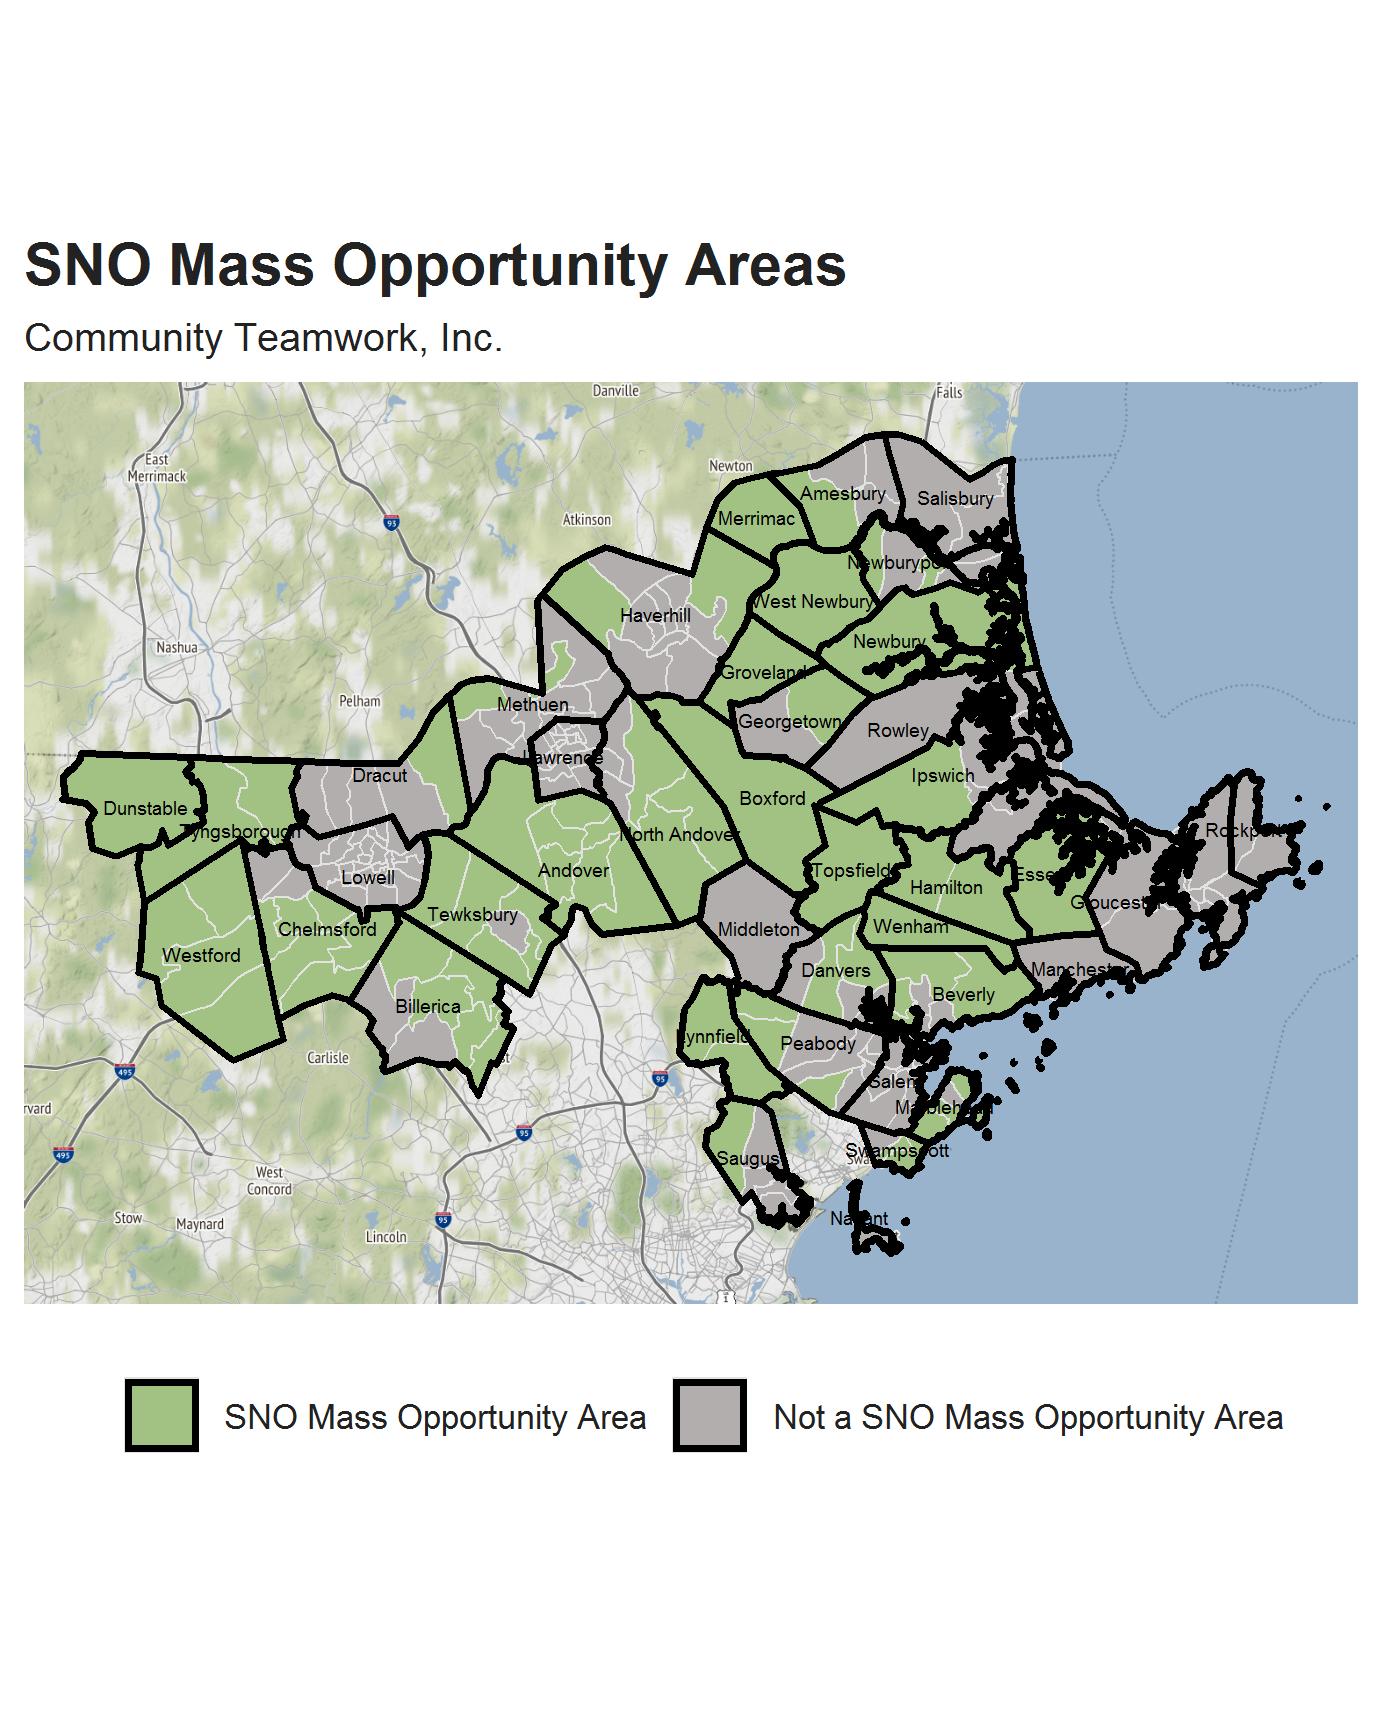 SNO Mass Map of North Shore and Merrimack that highlights opportunity areas within the region